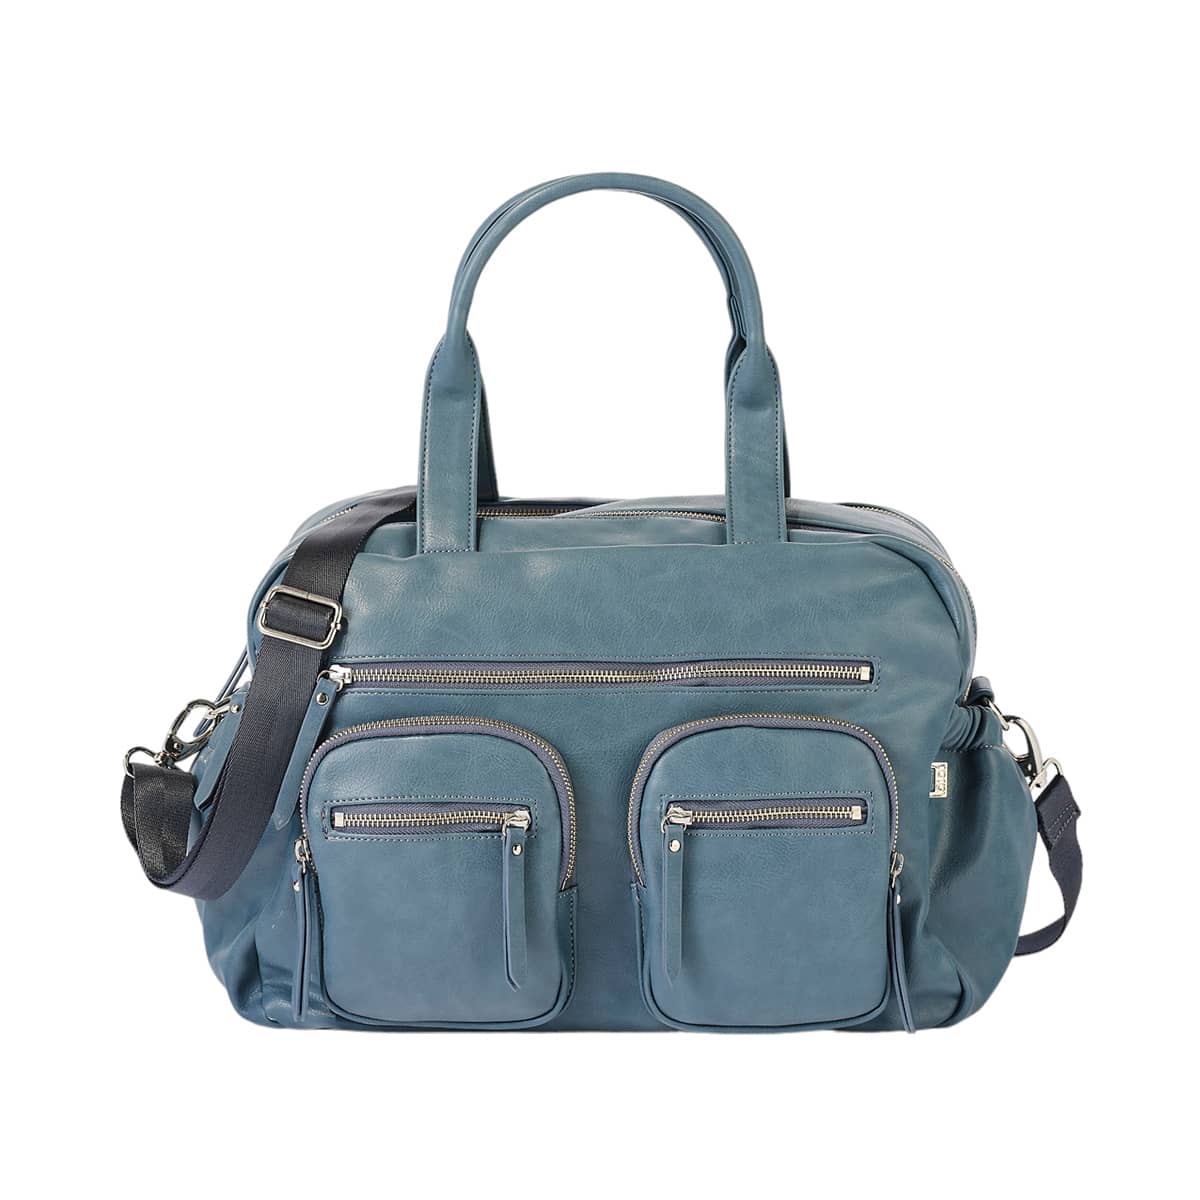 OiOi Faux Leather Carry All Nappy Bag - Stone Blue